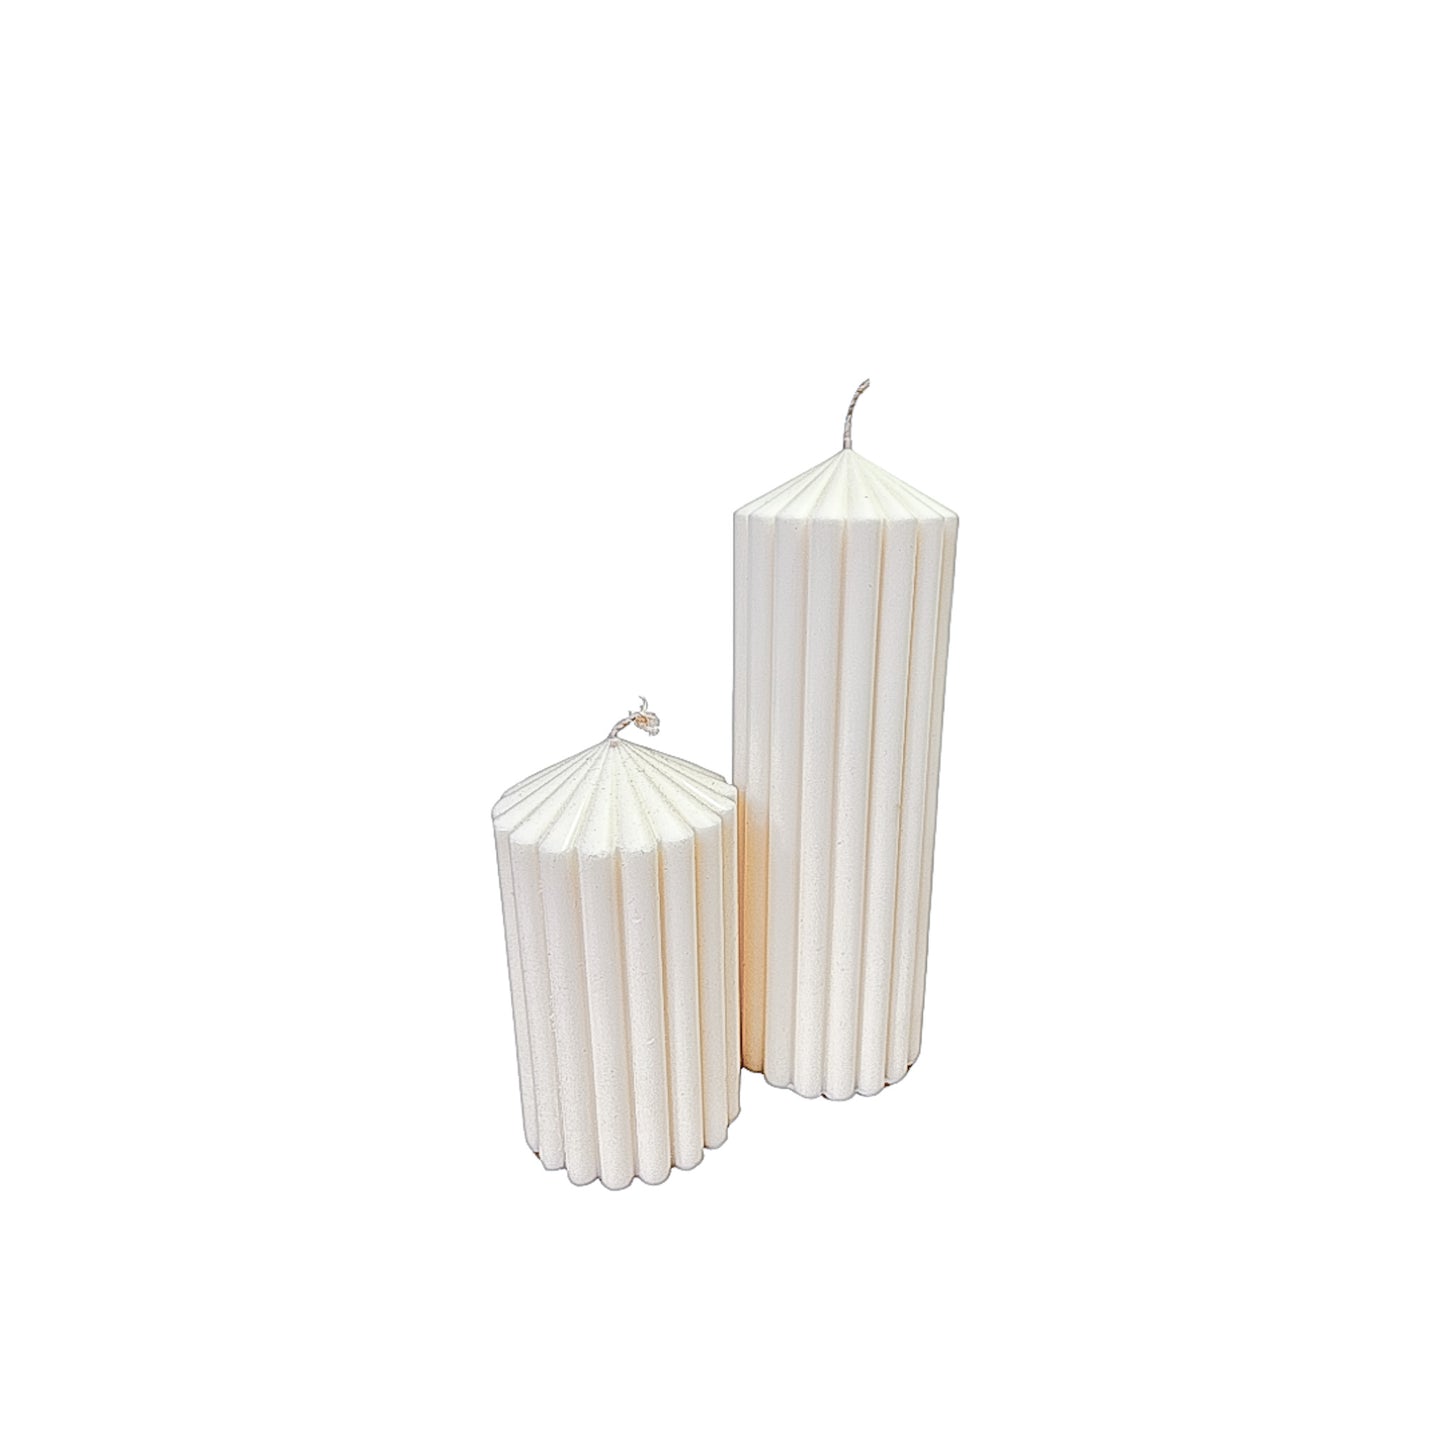 Hand Poured Soy Wax Pillar Candles